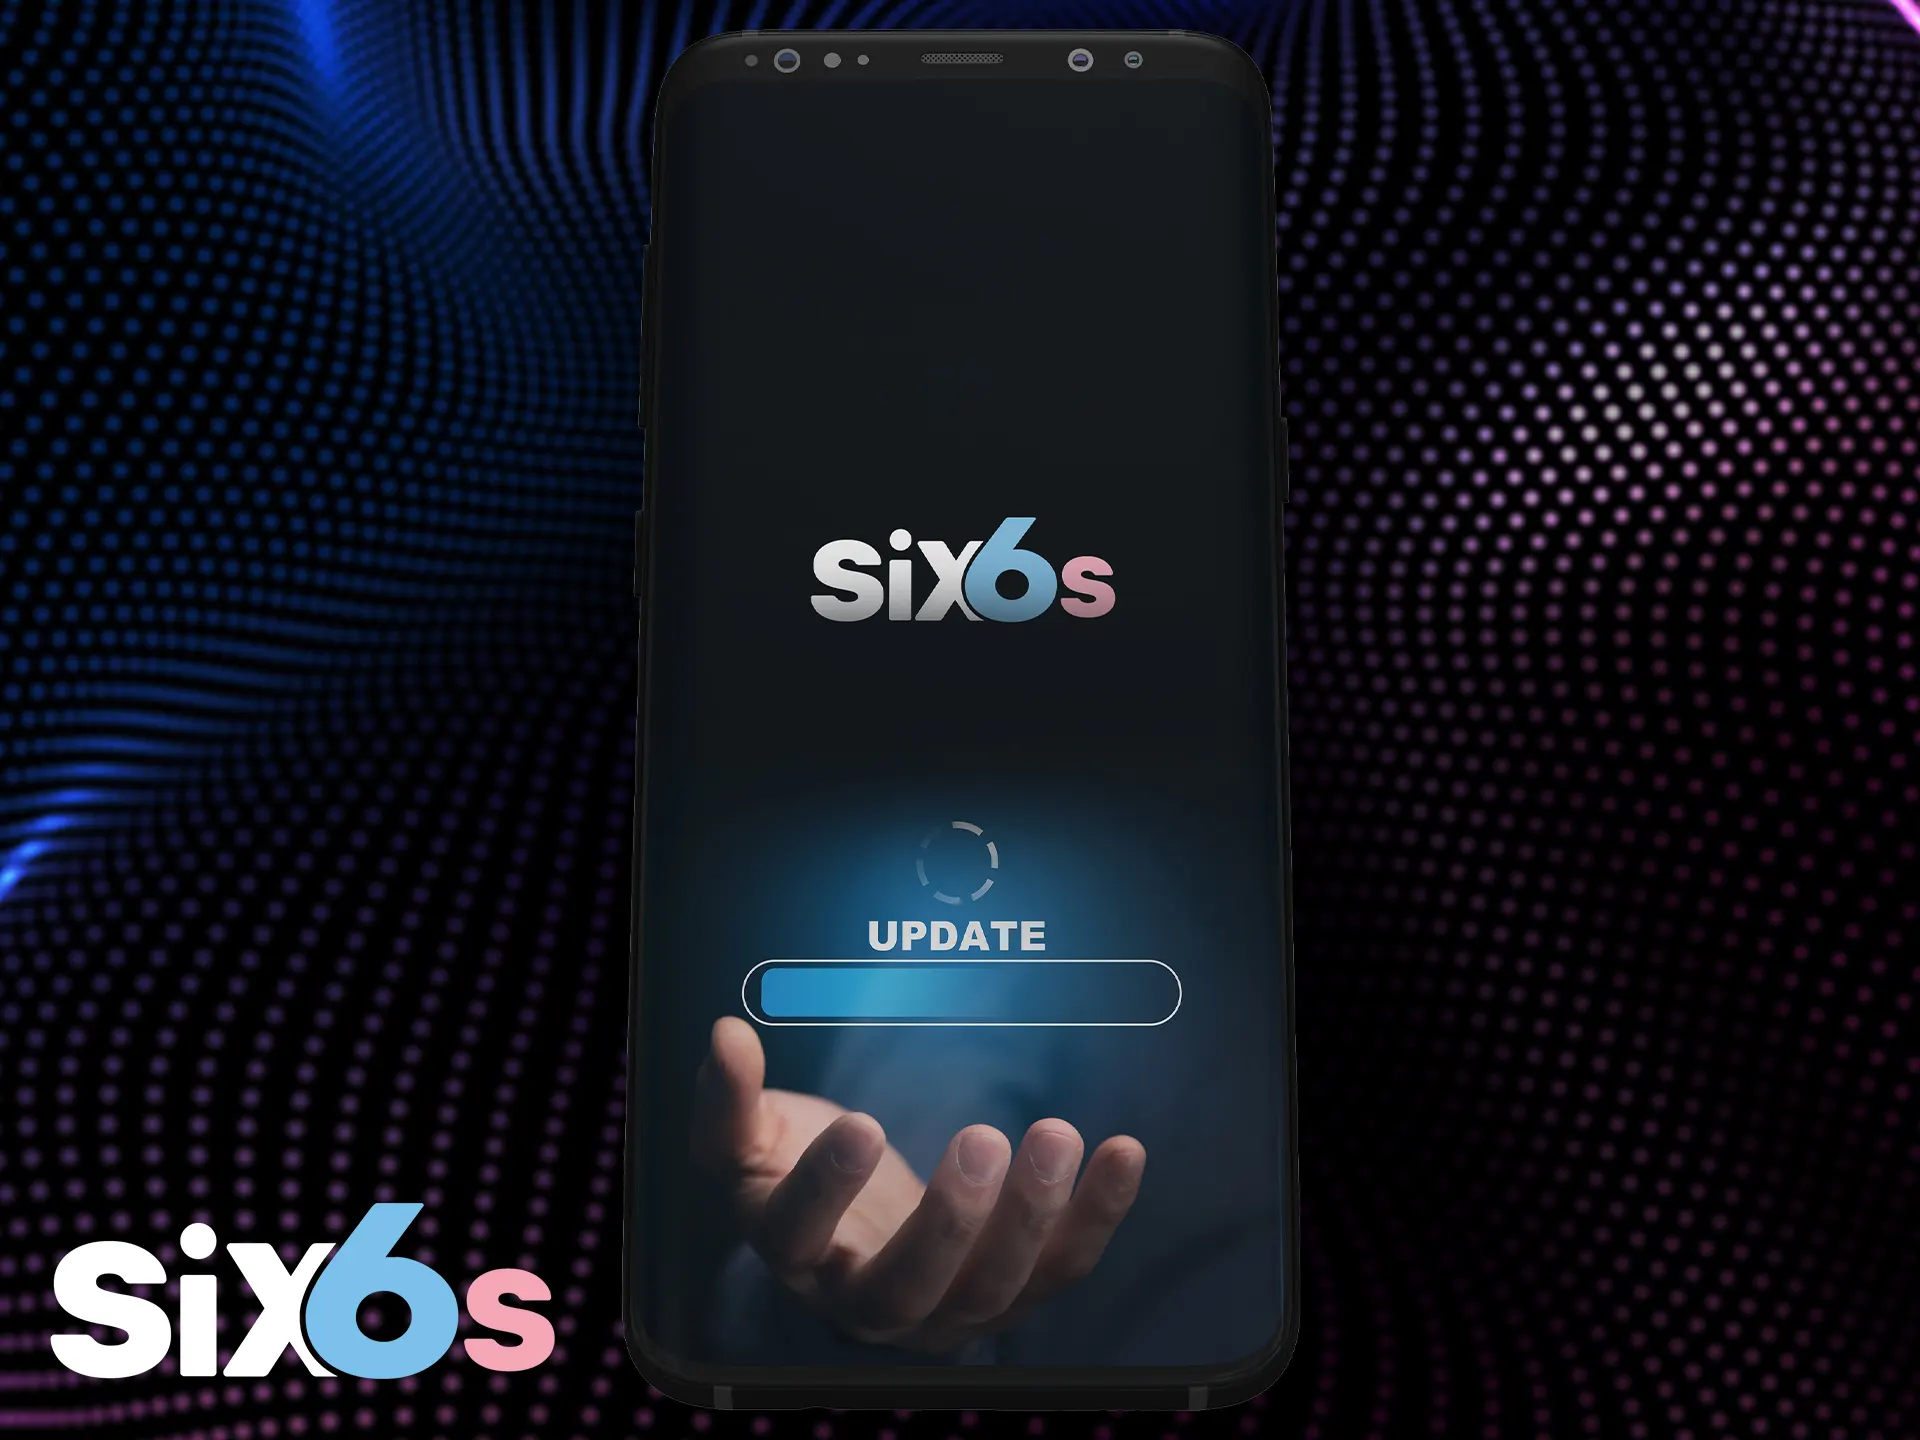 The Six6s app can update automatically.